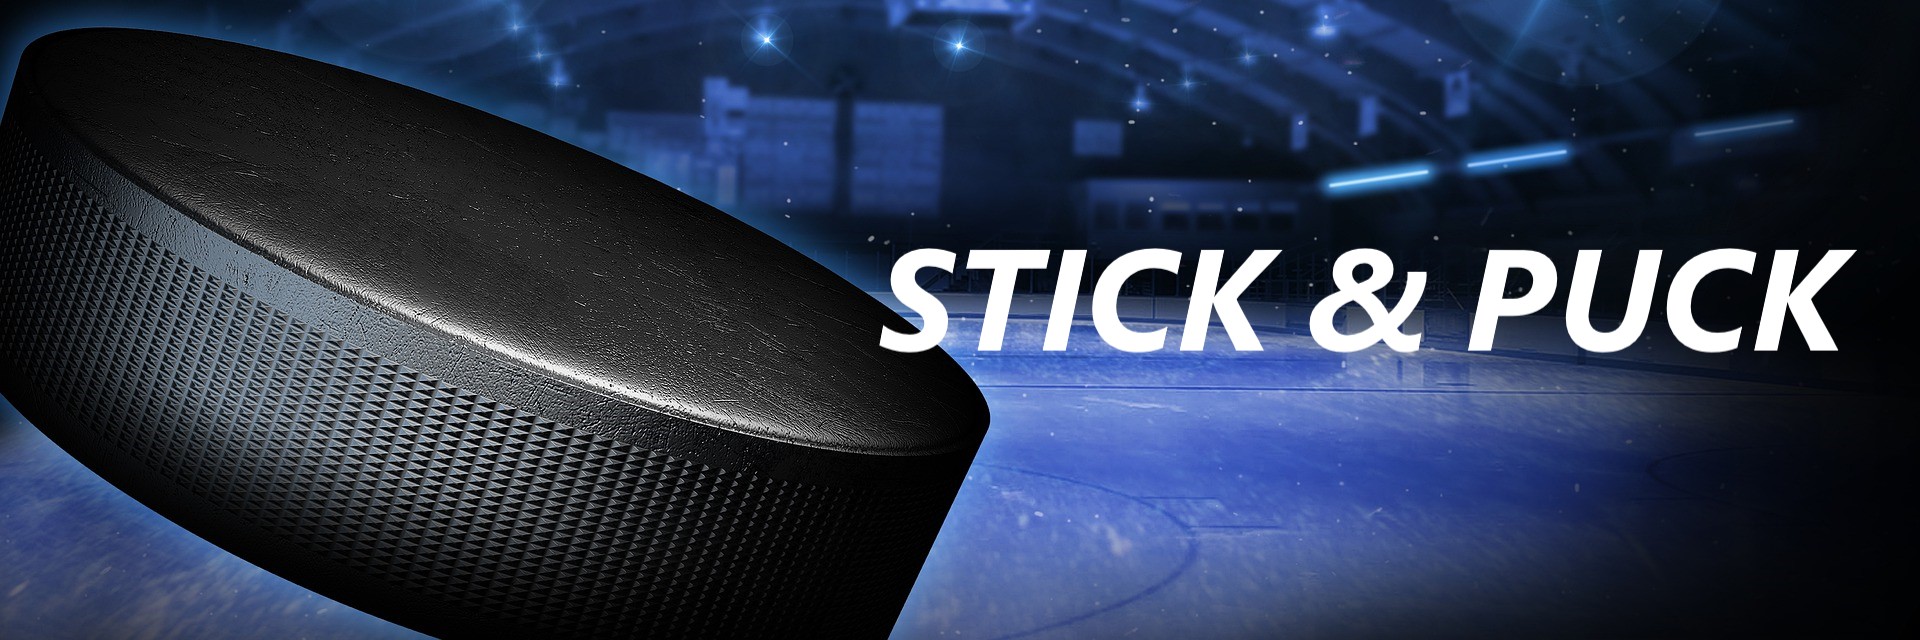 Stick and Puck